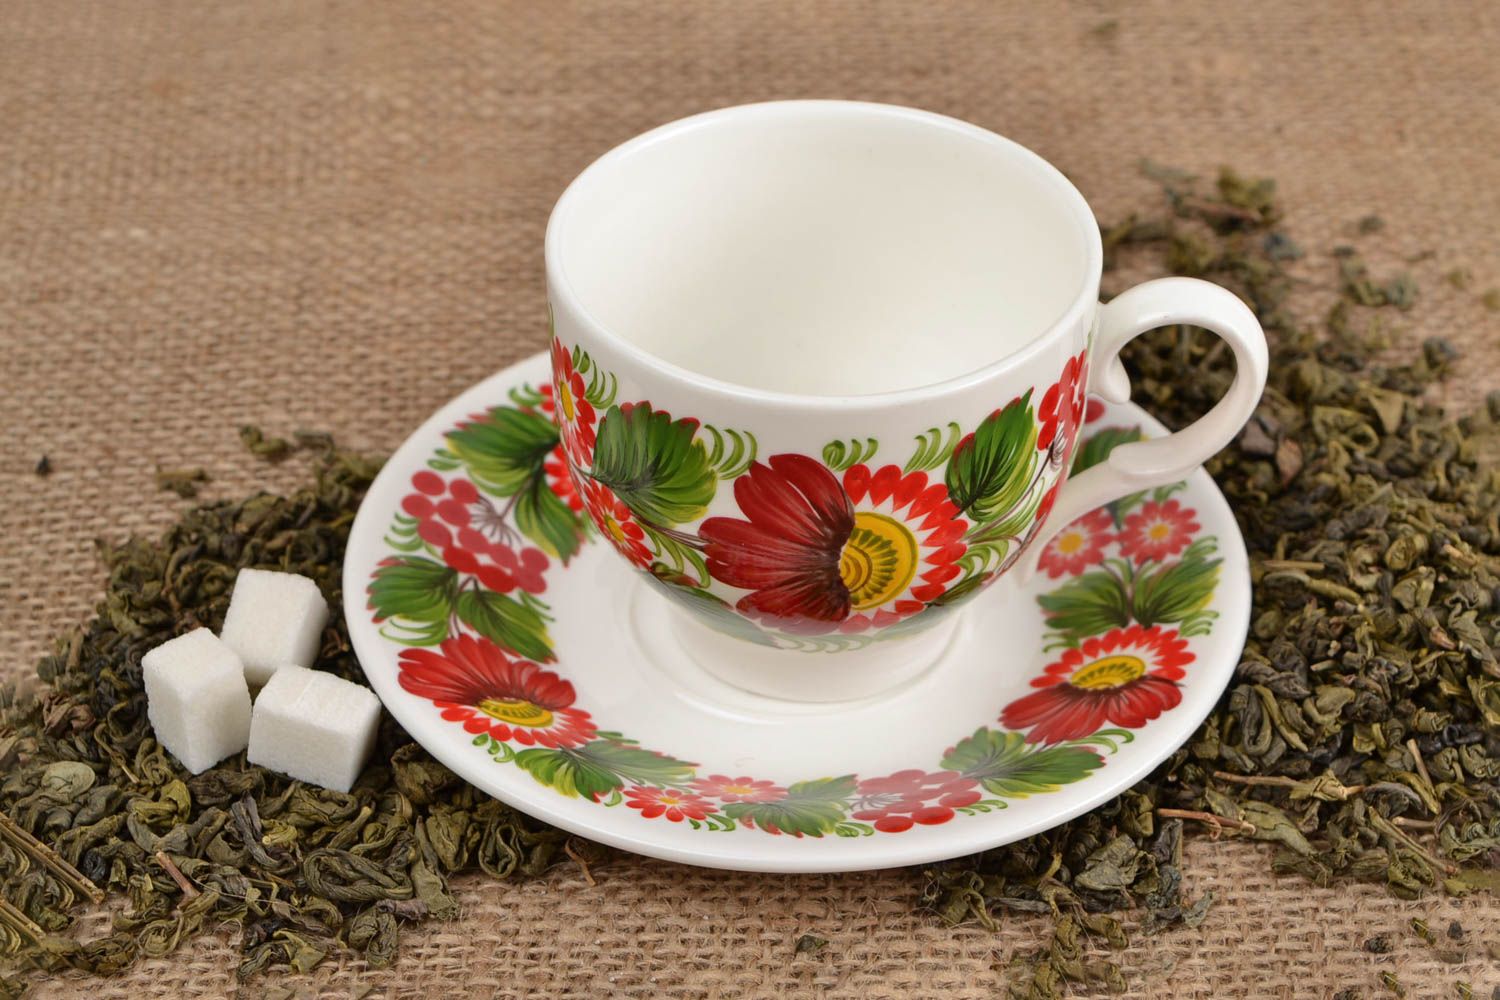 8 oz white porcelain teacup in bright floral red and green colors with handle and saucer photo 1